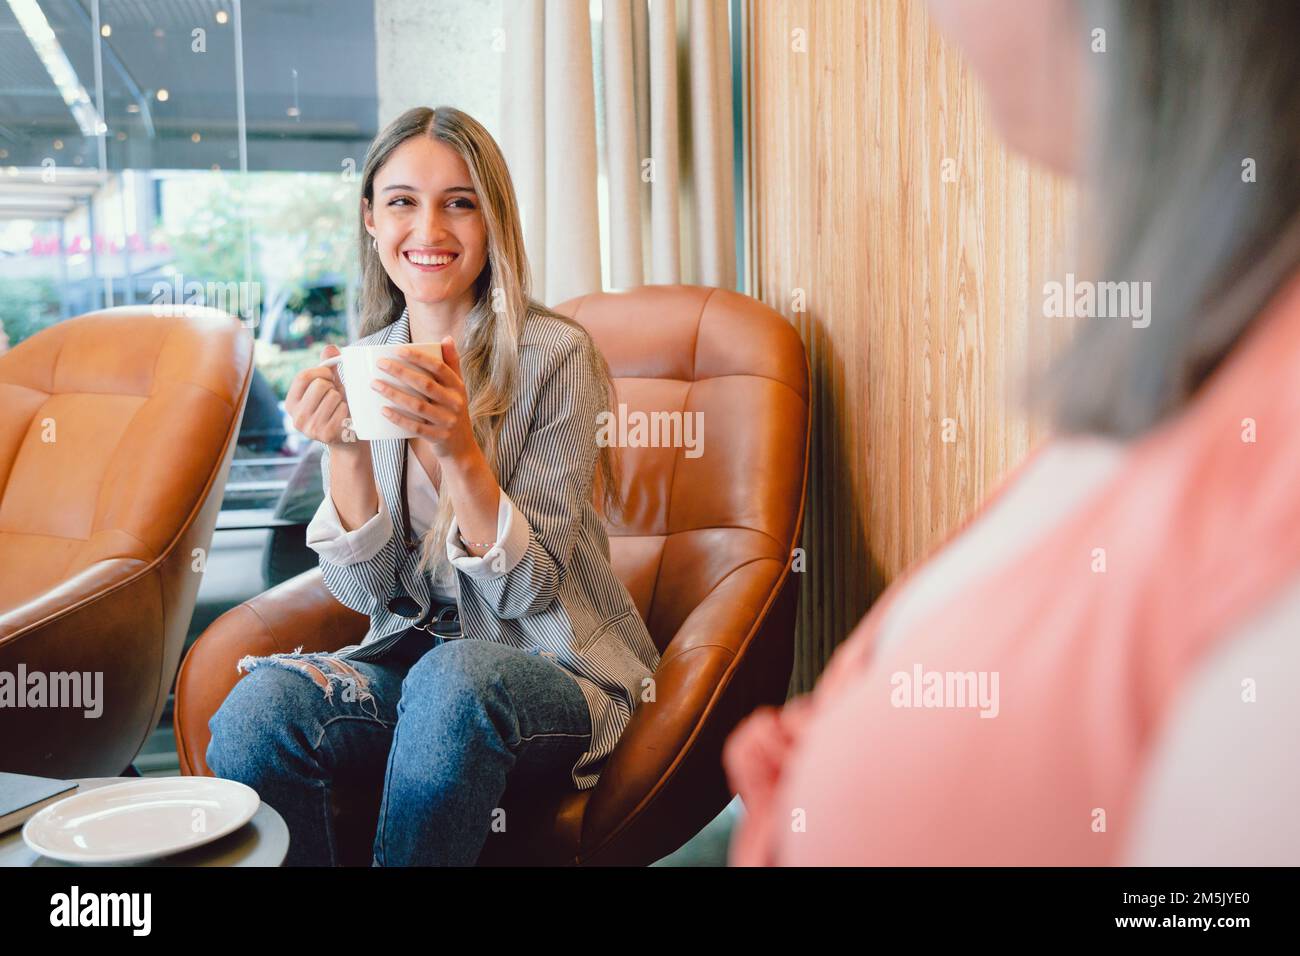 Happy young woman sitting on an armchair, talking and sharing coffee with a friend in open workplace Stock Photo